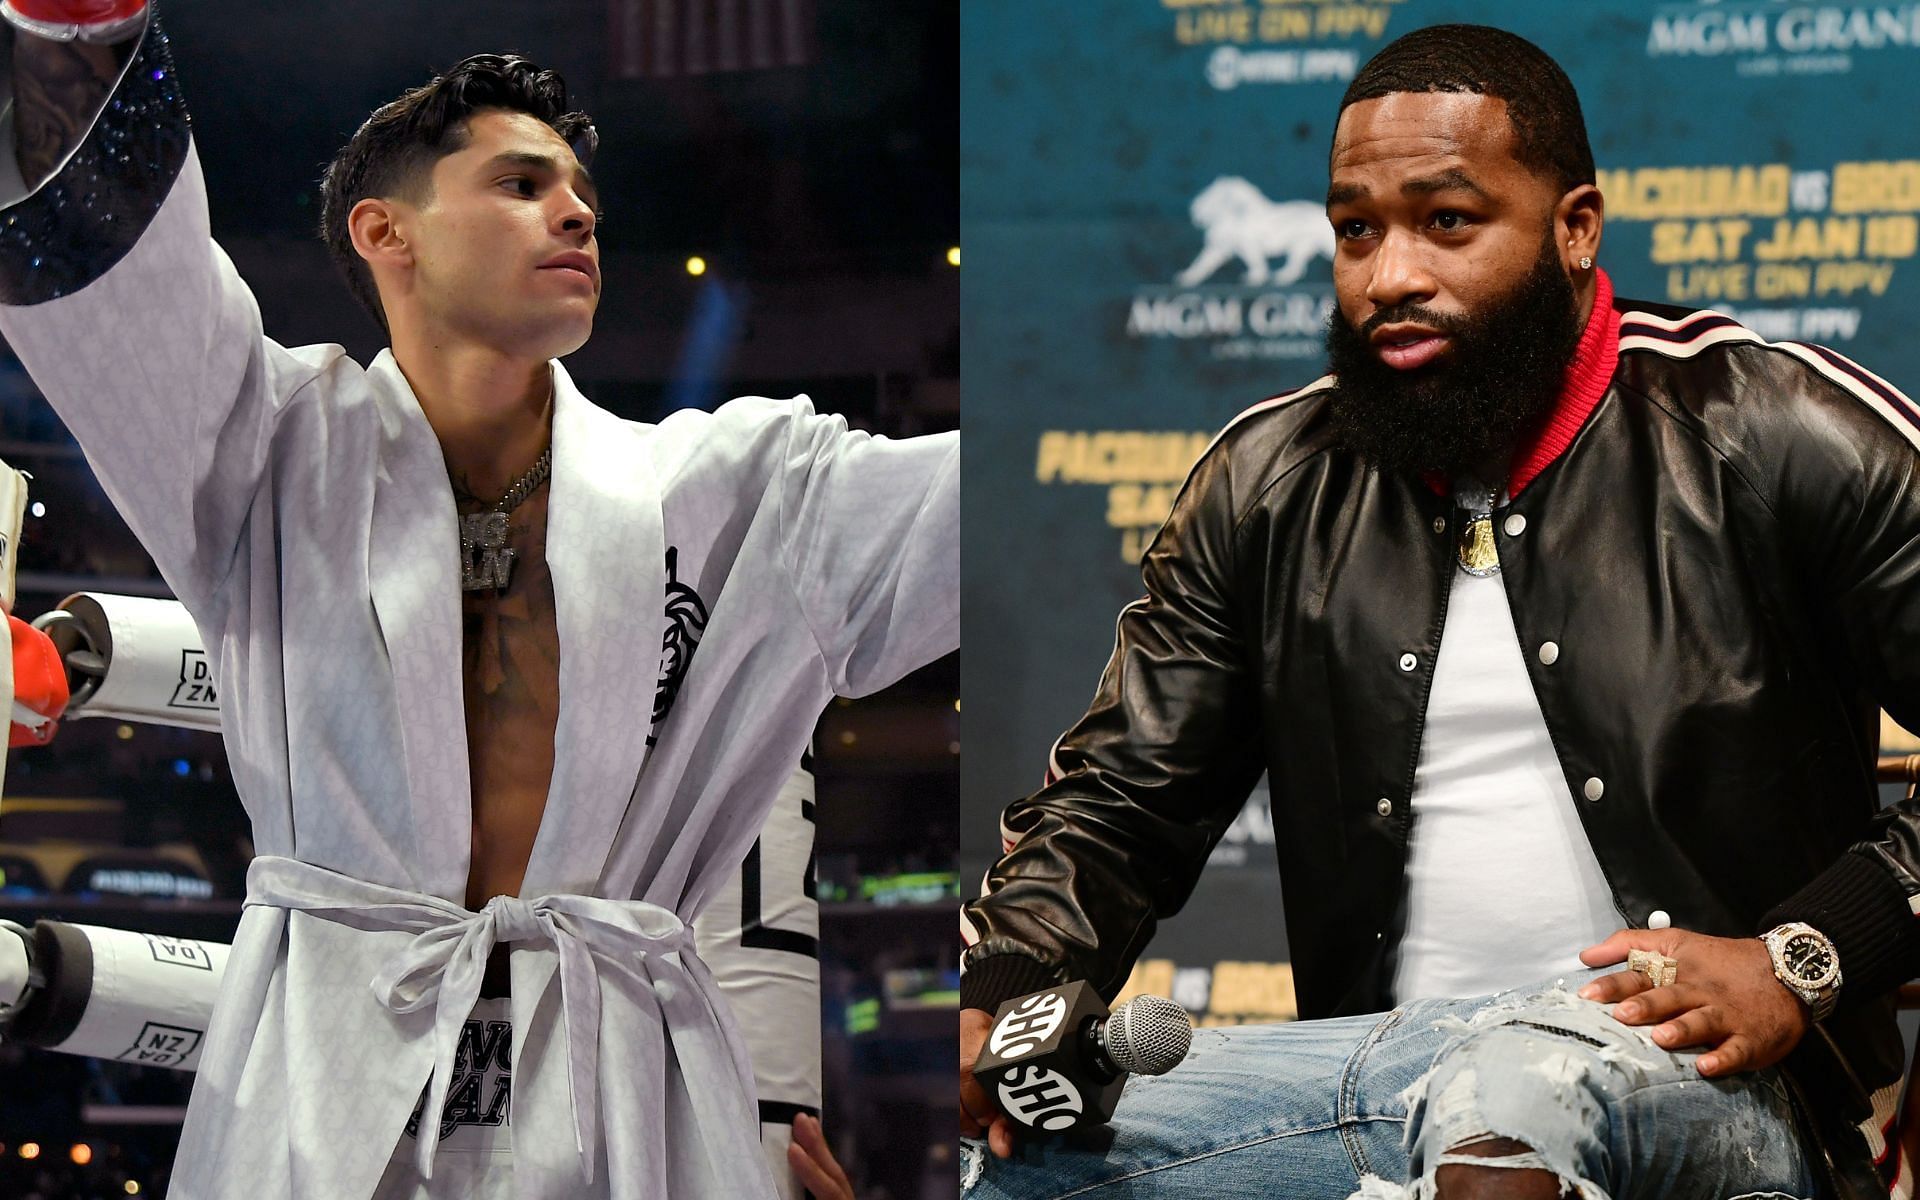 Ryan Garcia (left) and Adrien Broner (right) (Image credits Getty Images)